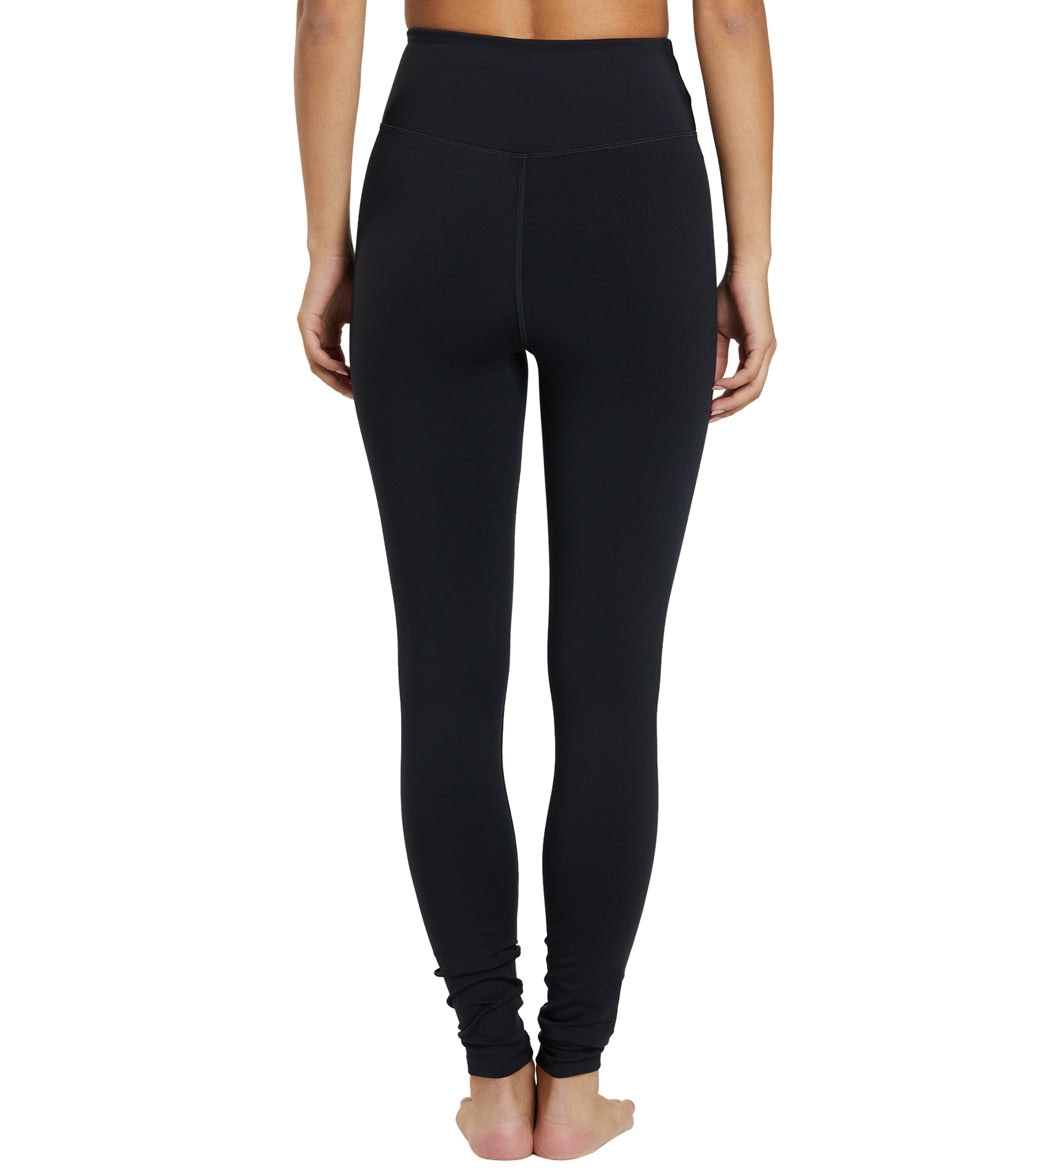 Girlfriend Collective LUXE Legging 28.5 at